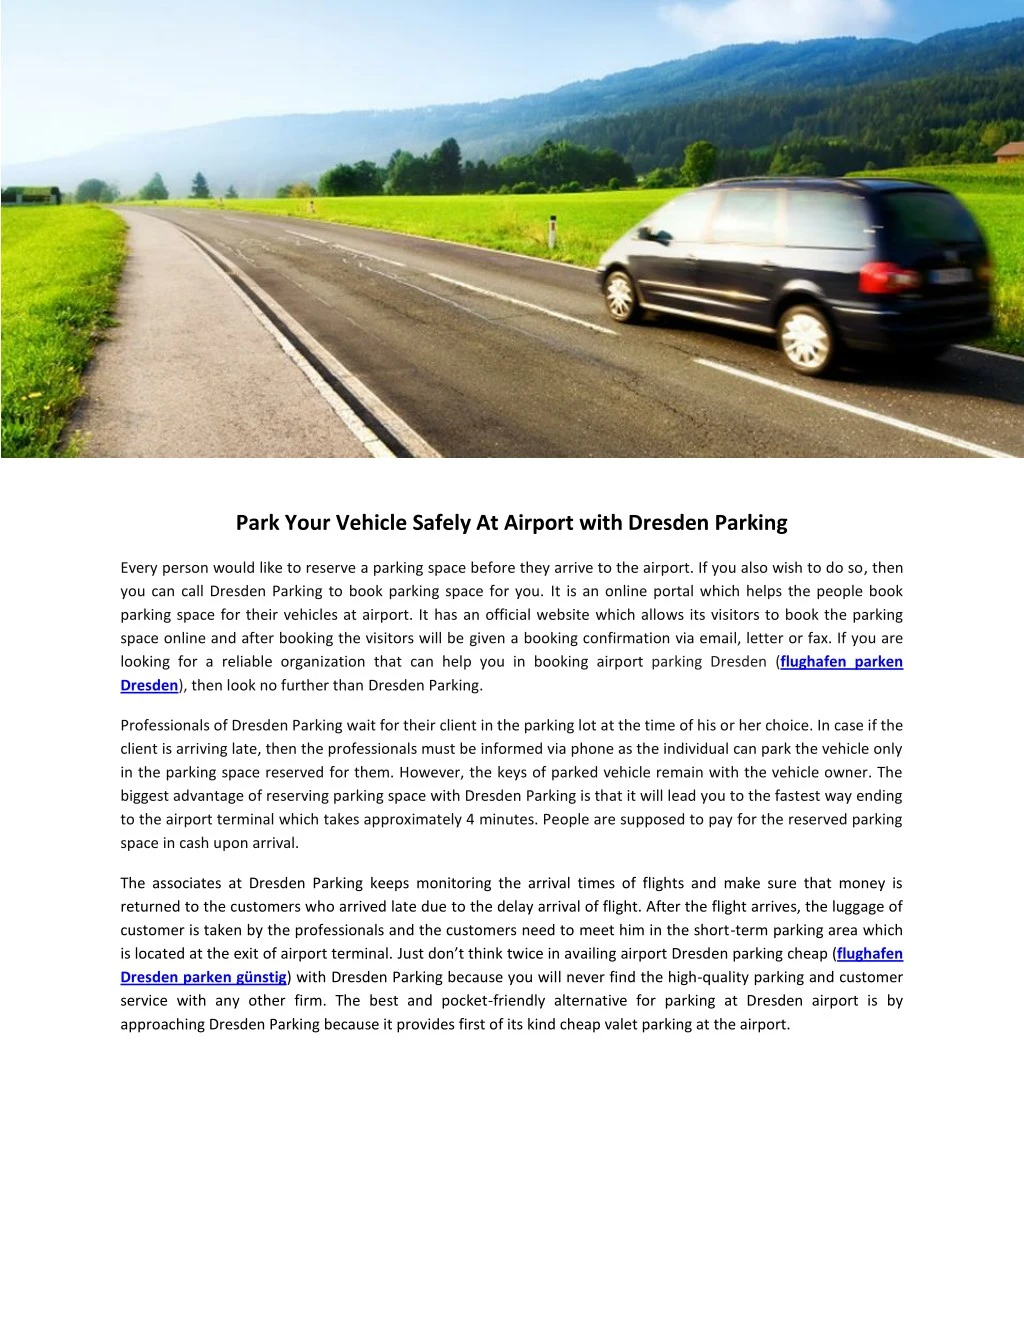 park your vehicle safely at airport with dresden